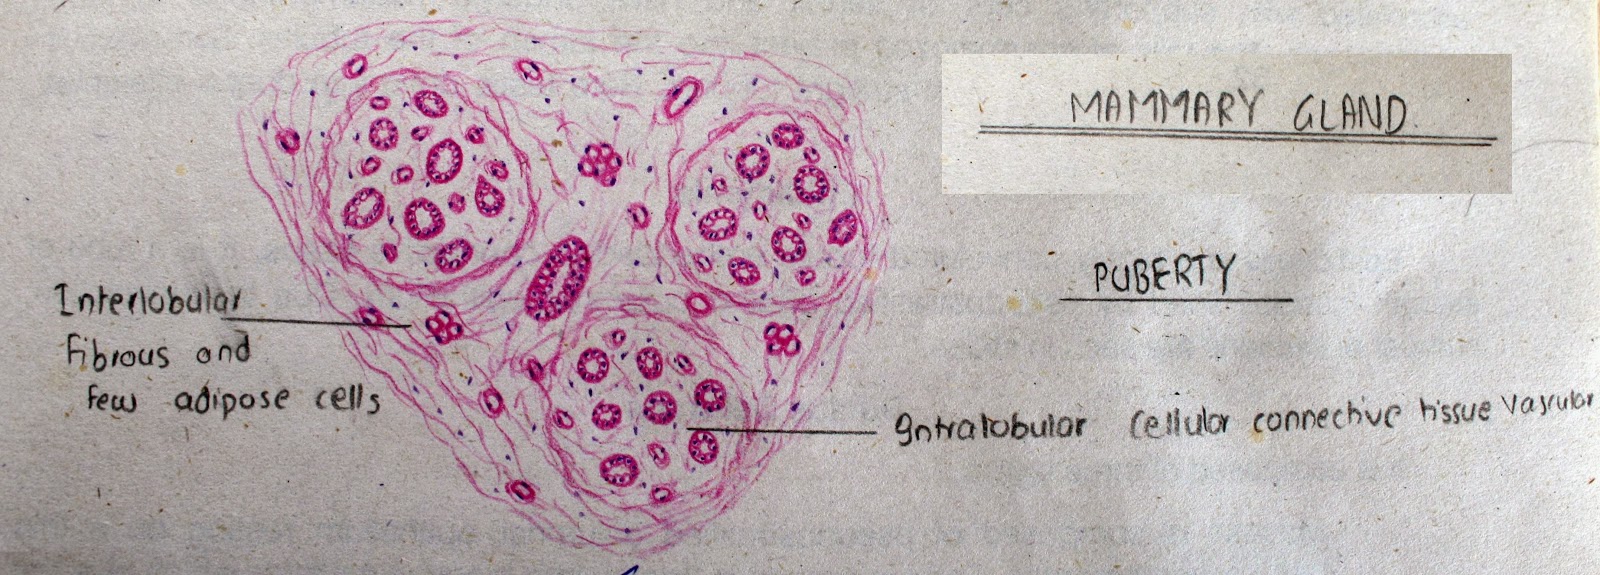 [Mammary%2520Gland%2520at%2520Puberty%2520high%2520resolution%2520histology%2520diagram%255B3%255D.jpg]